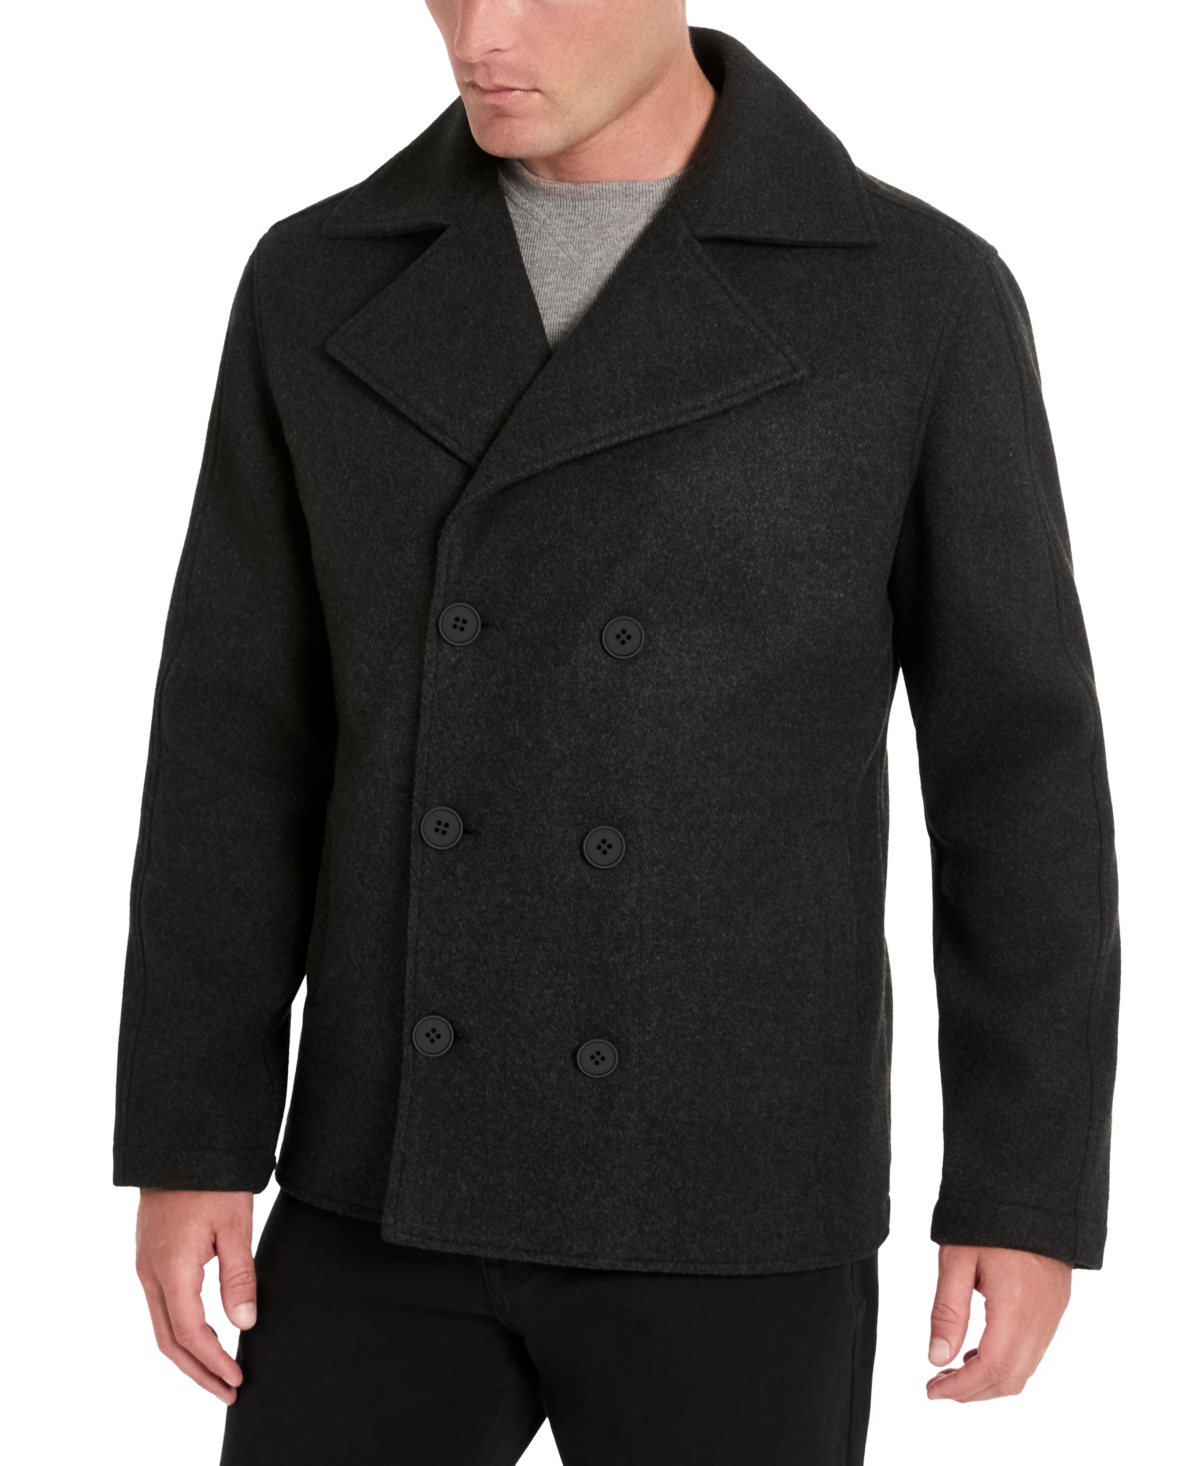 Men's Double-Breasted Peacoat - Charcoal